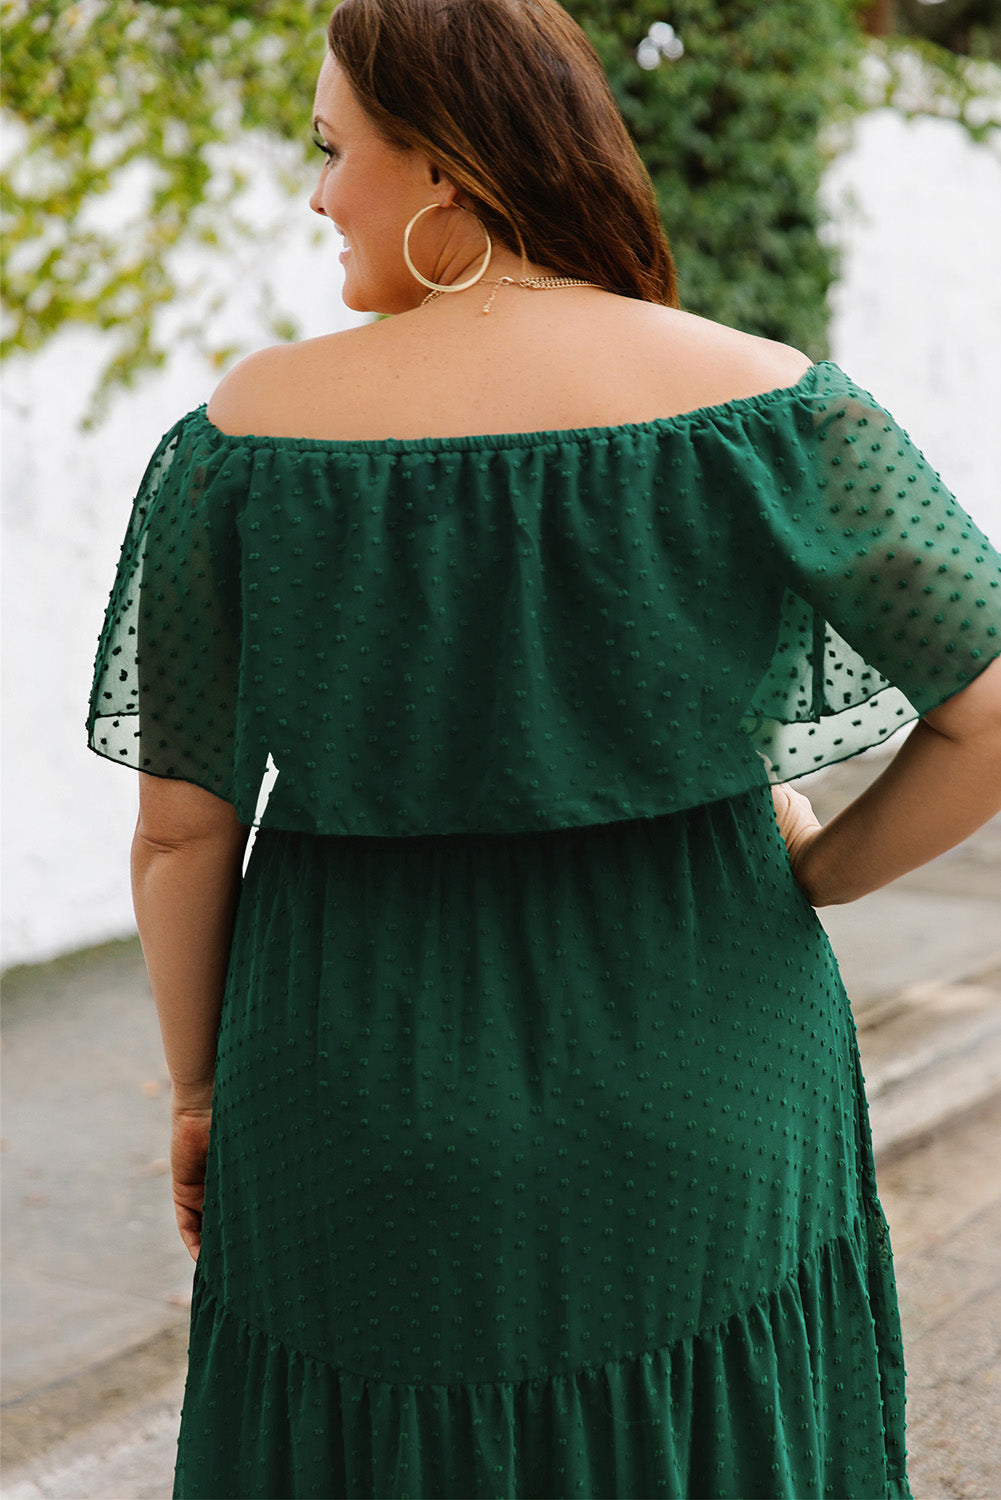 Load image into Gallery viewer, Plus Size Swiss Dot Off-Shoulder Tiered Dress
